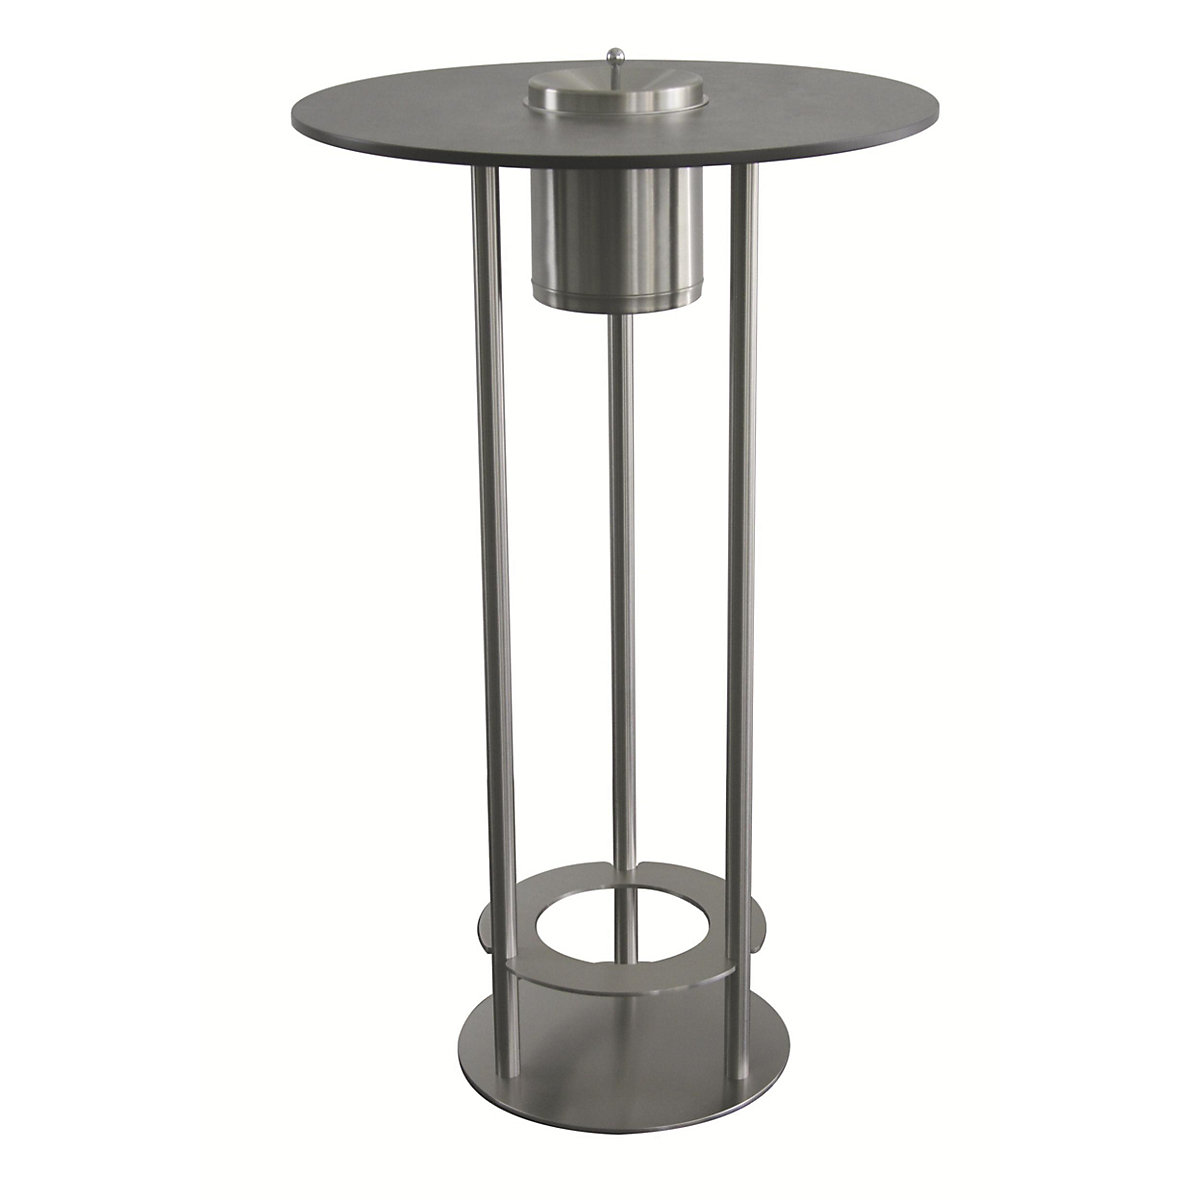 Pedestal table for smokers, diameter 675 mm, stainless steel-2